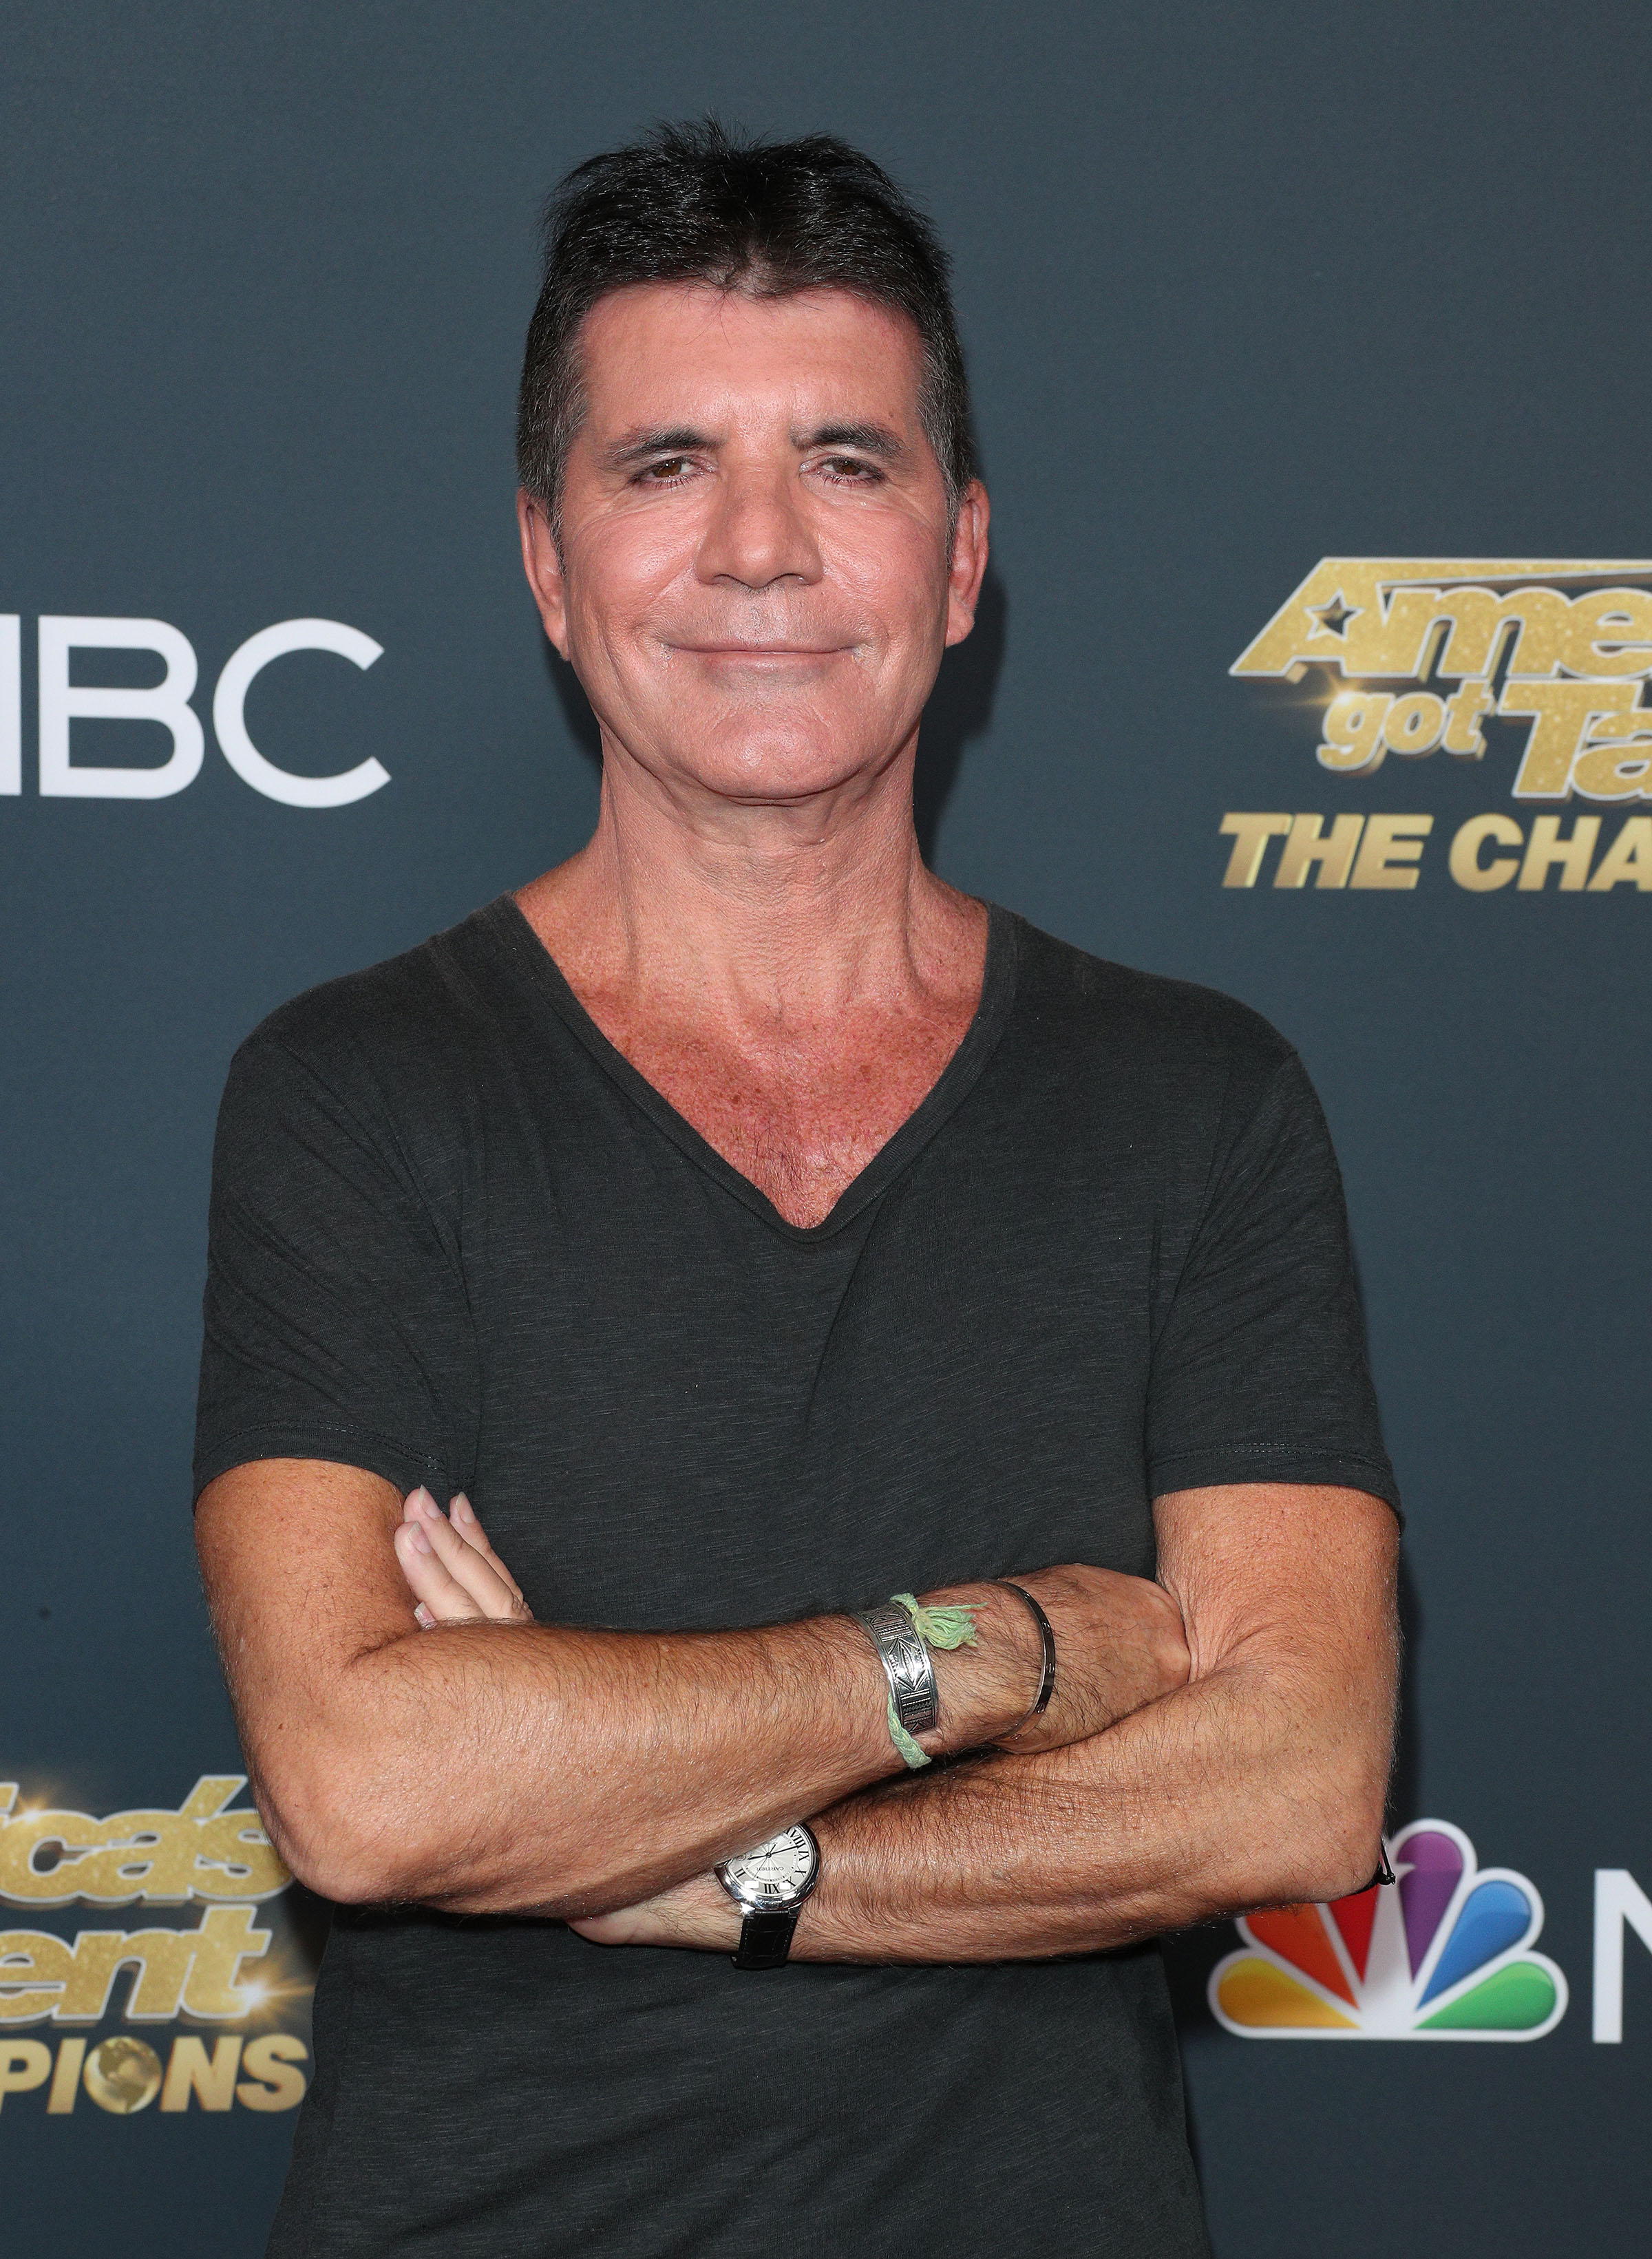 Simon showcased his weight loss at the America's Got Talent Champions launch